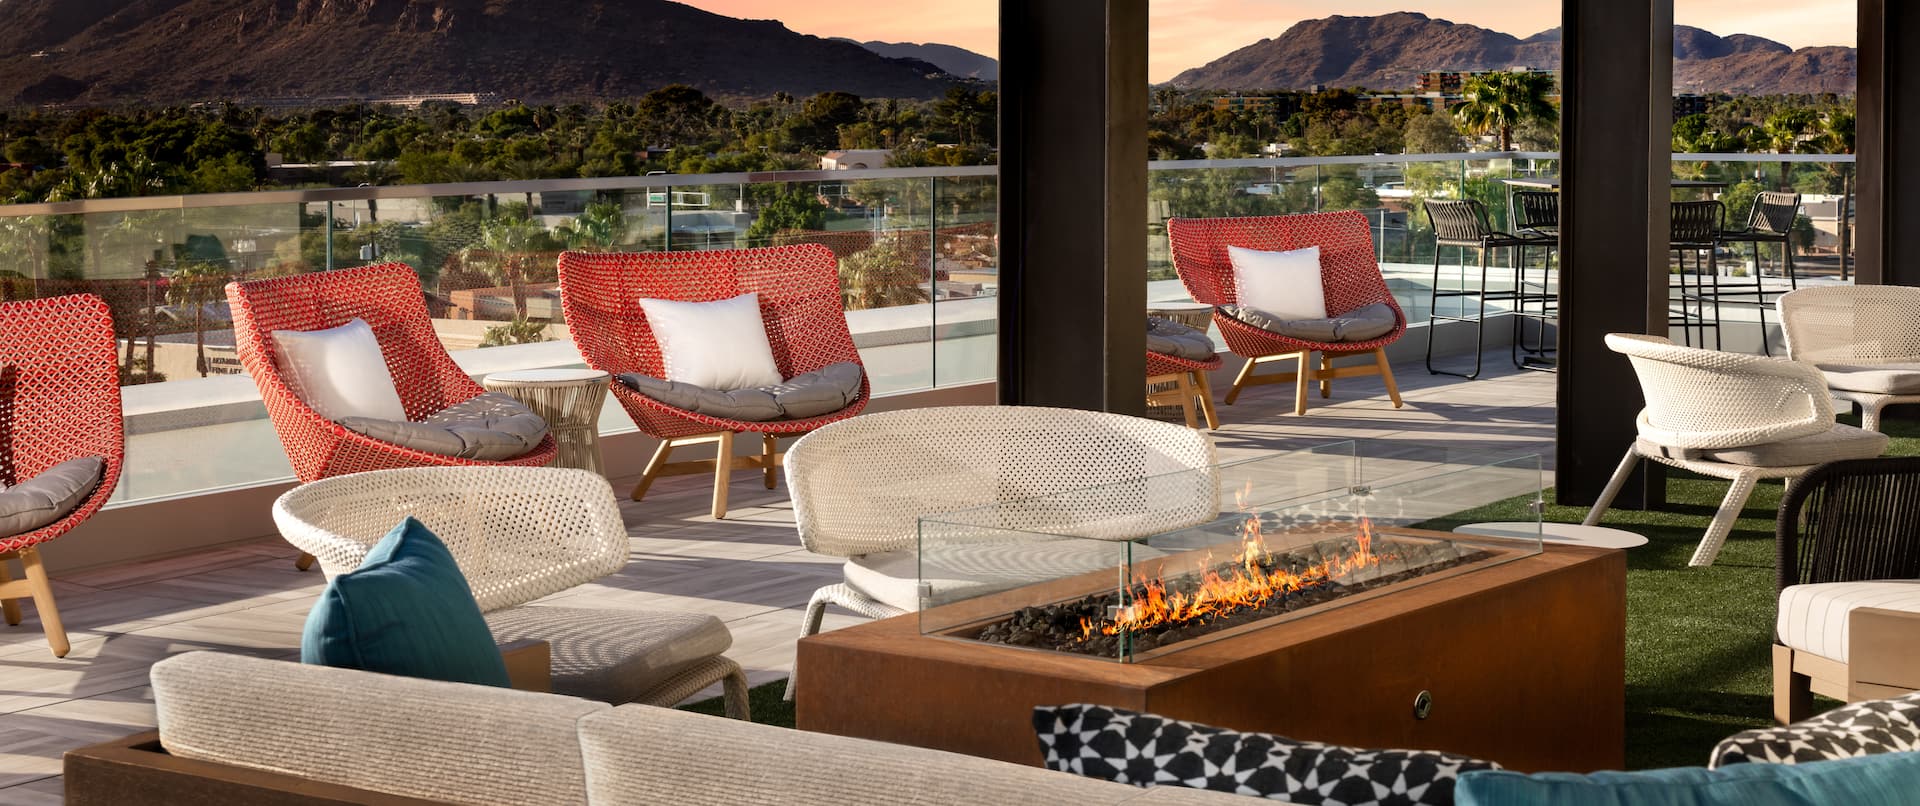 Patio Area with Firepit and View of the Mountains